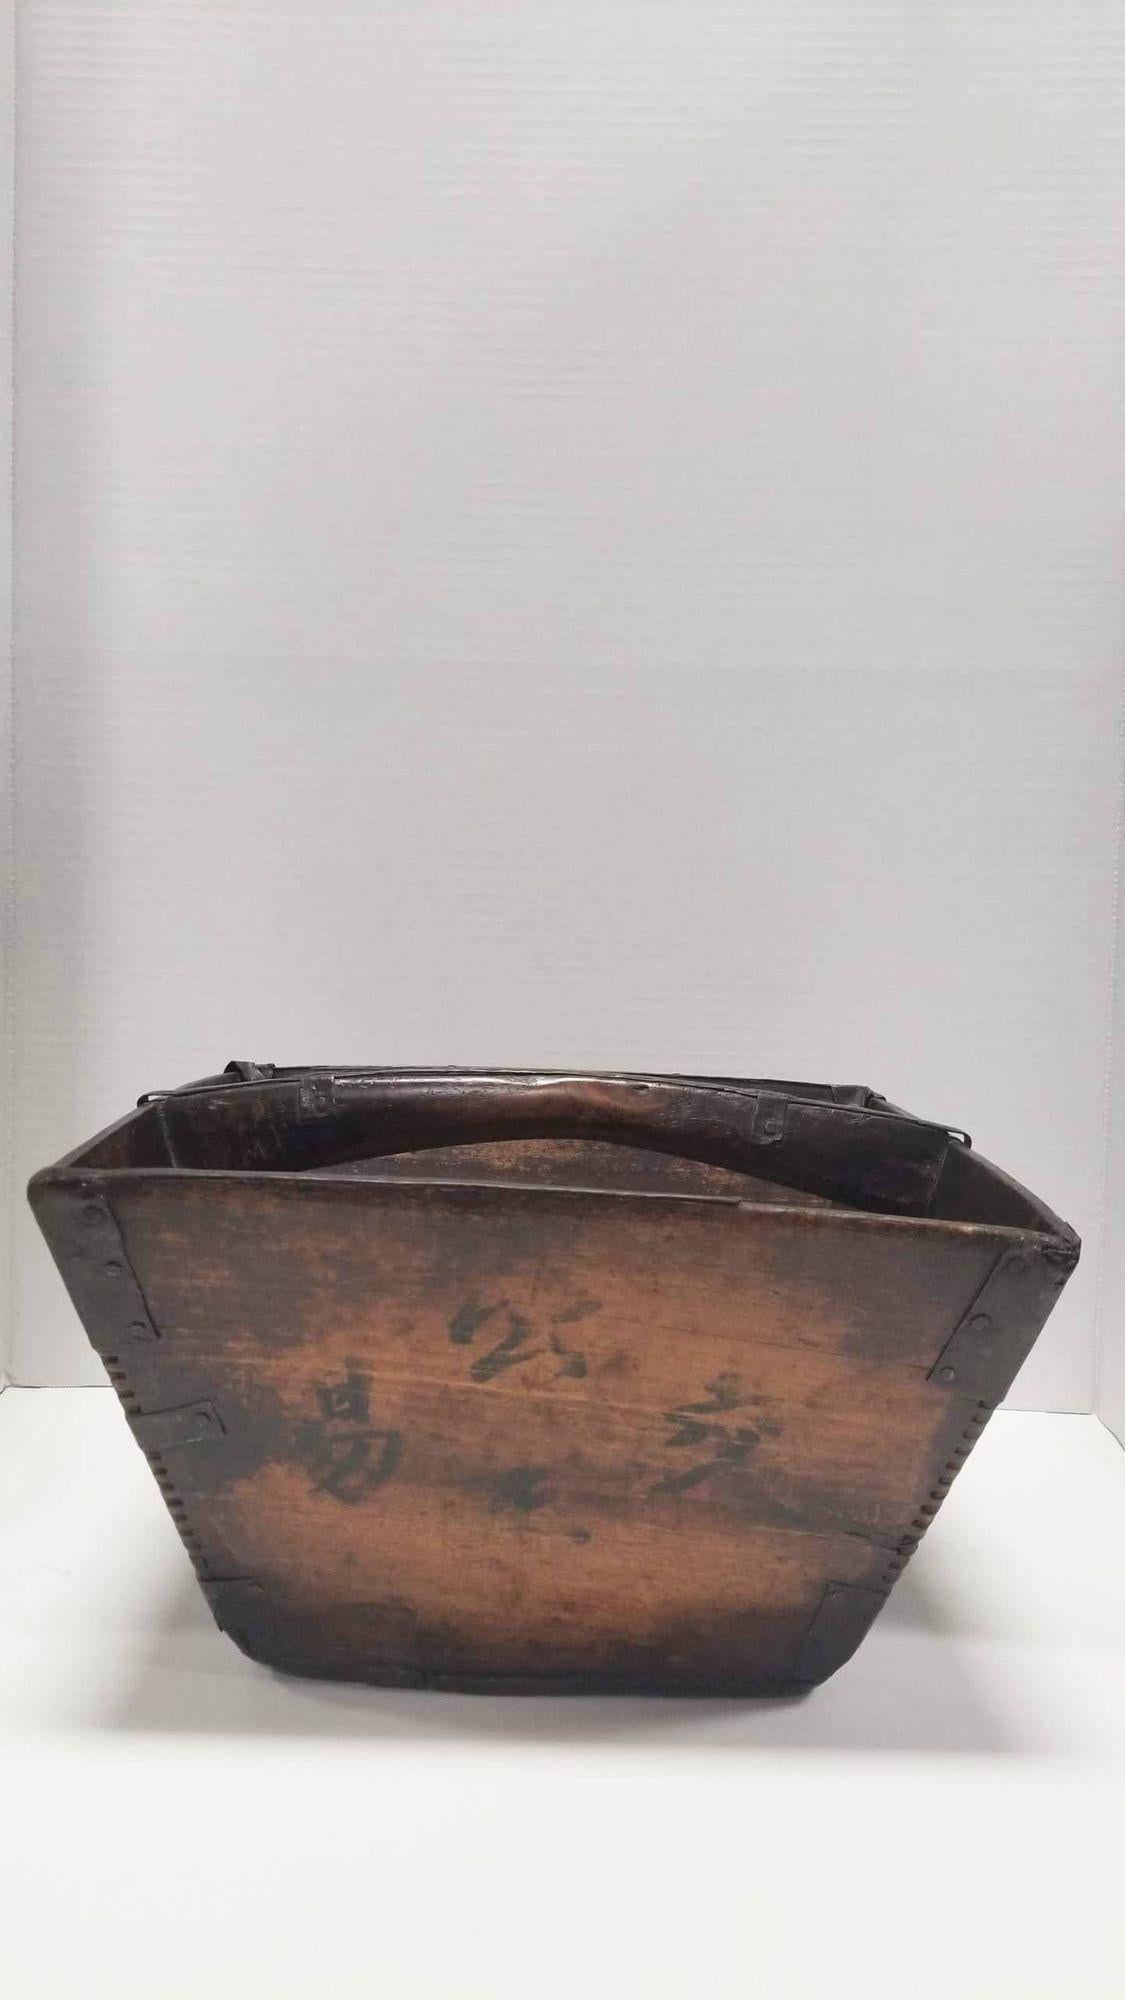 Hailing from the culturally vibrant Shanxi Province of China, this stunning rice container is a true masterpiece crafted with precision from Elm and traditional Chinese wood. From the years 1850 and 1880. This container serves as a timeless emblem